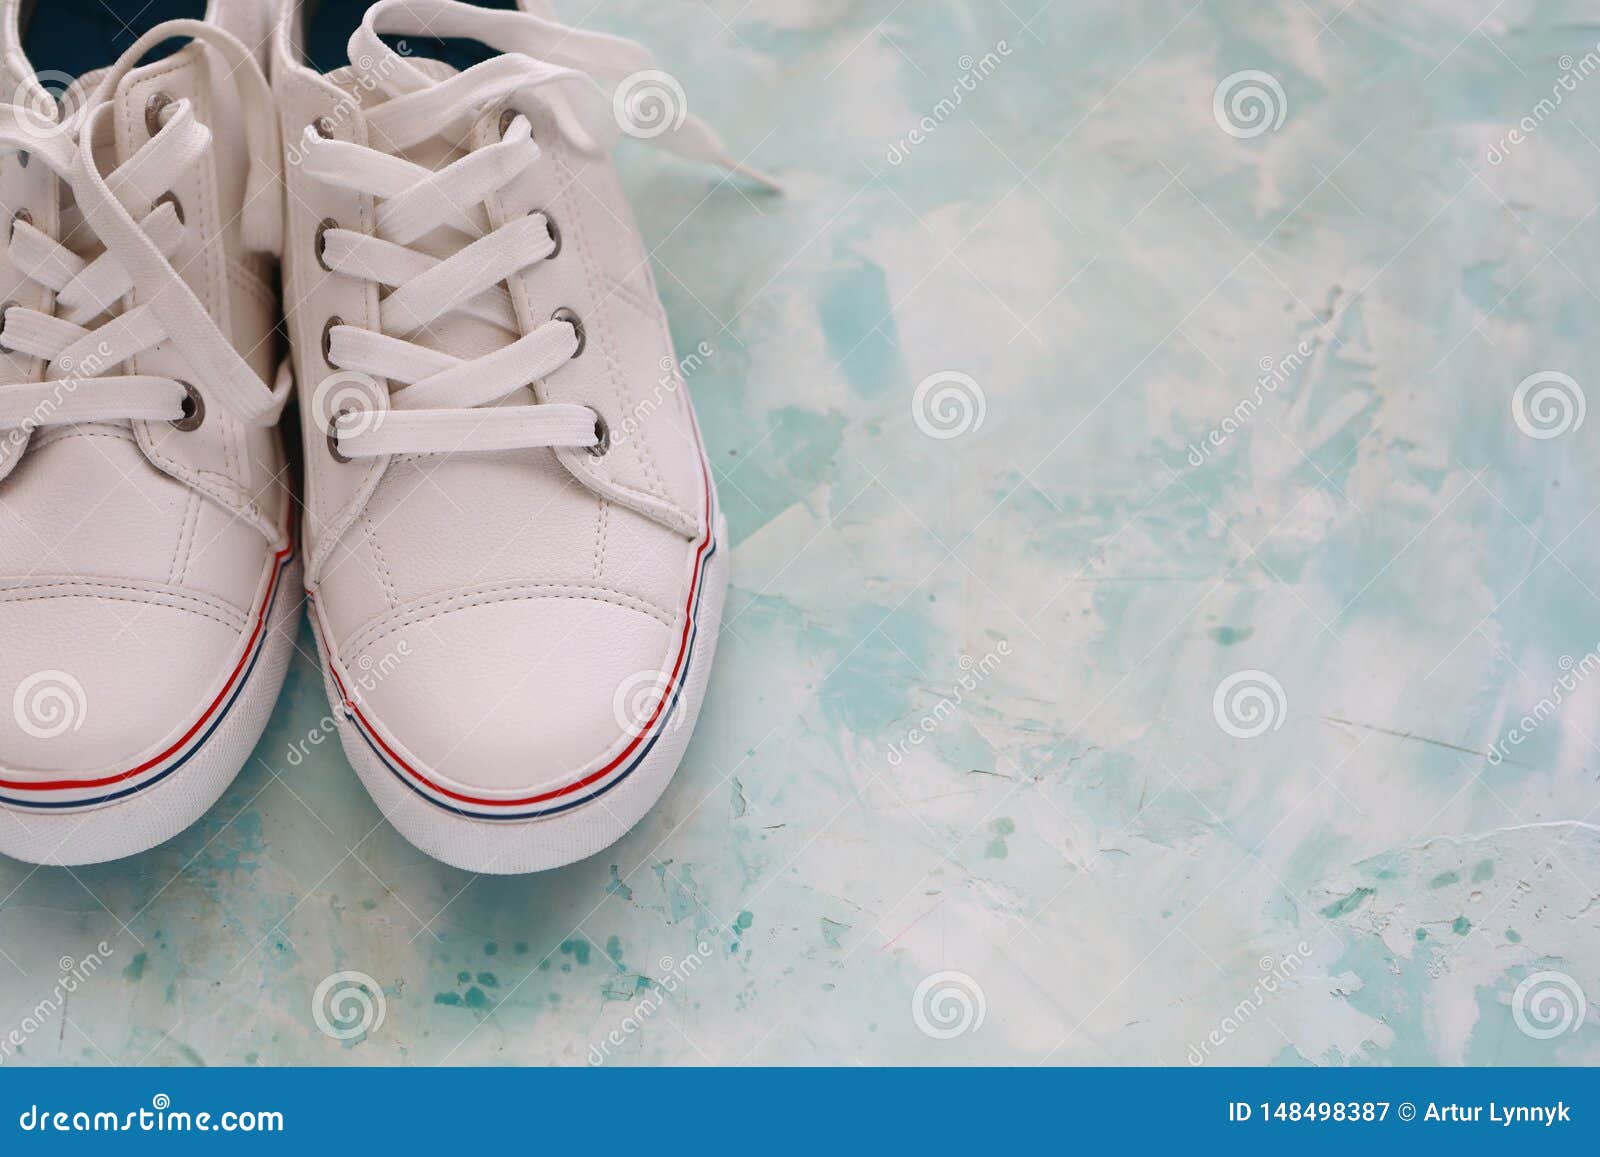 Beautiful White Sneakers on a Light Background Stock Image - Image of ...